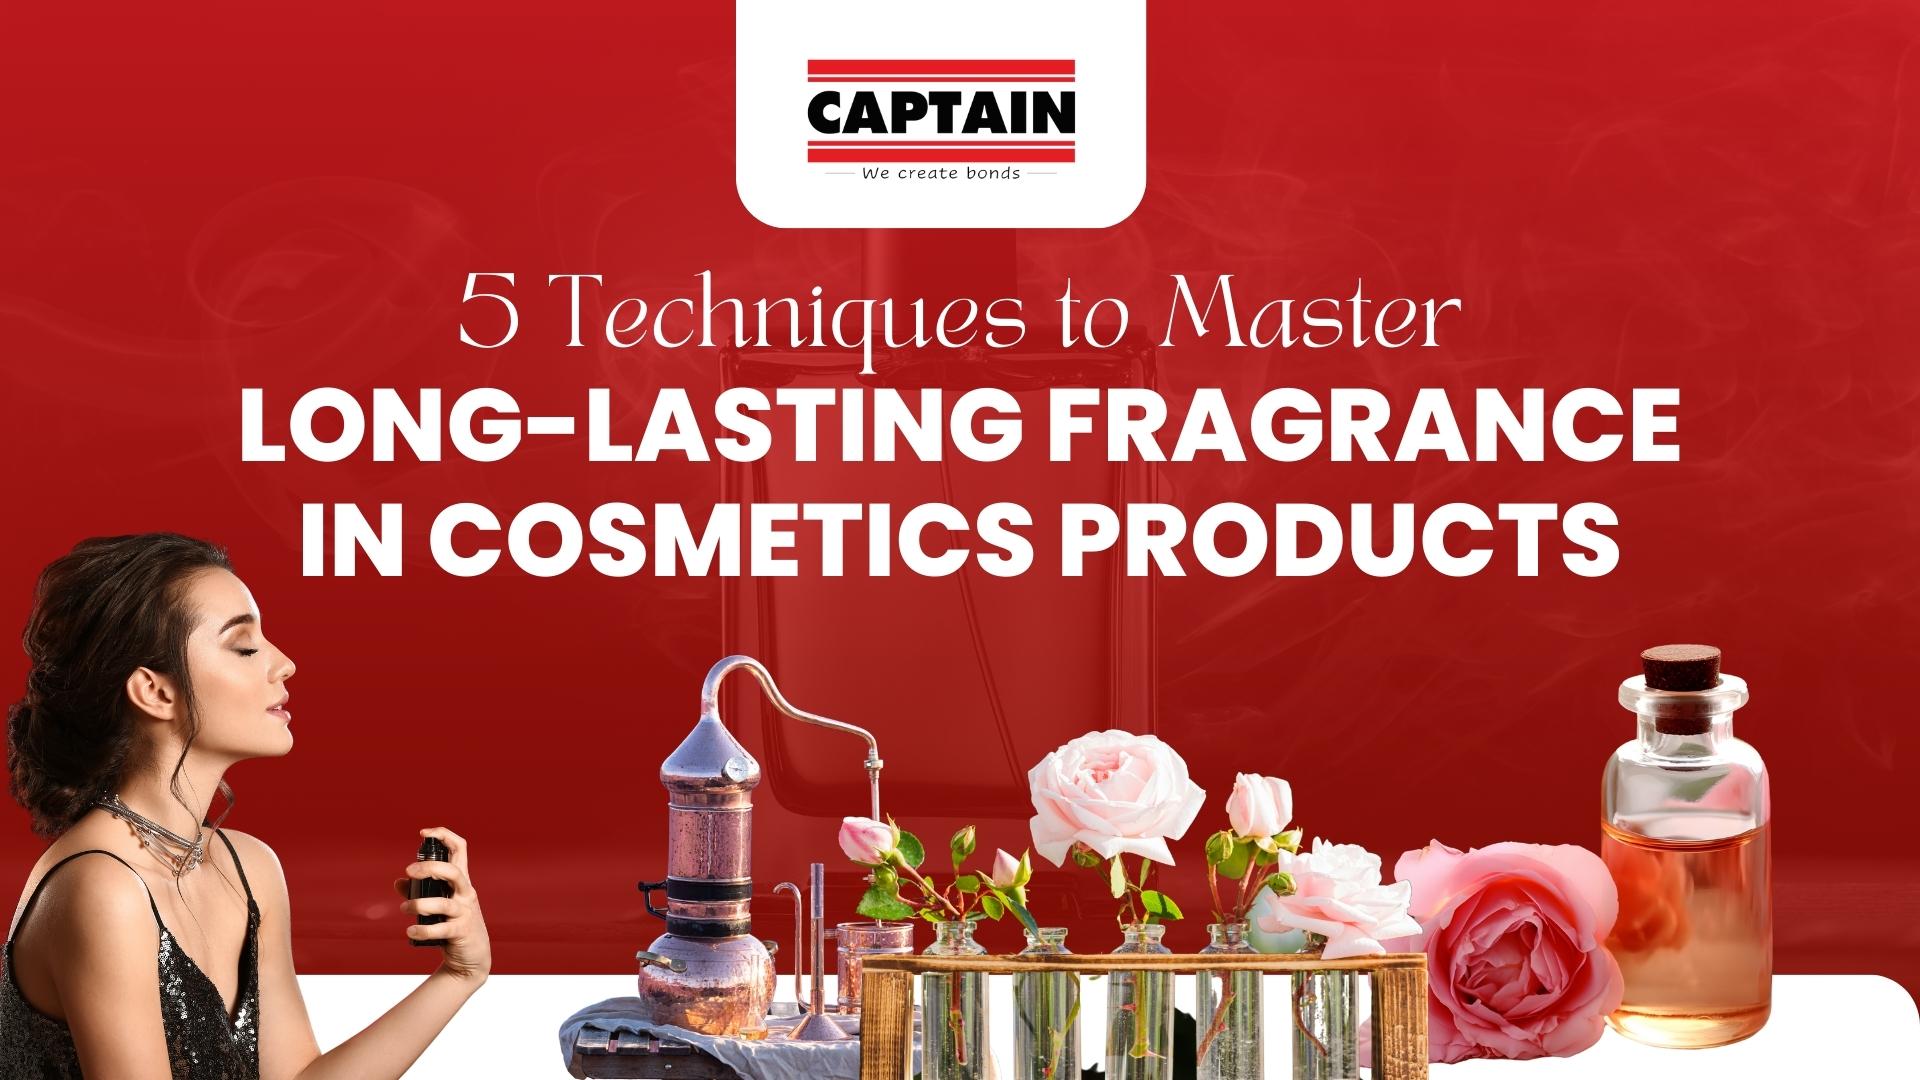 5 Techniques to Master Long-Lasting Fragrance in Cosmetics Products